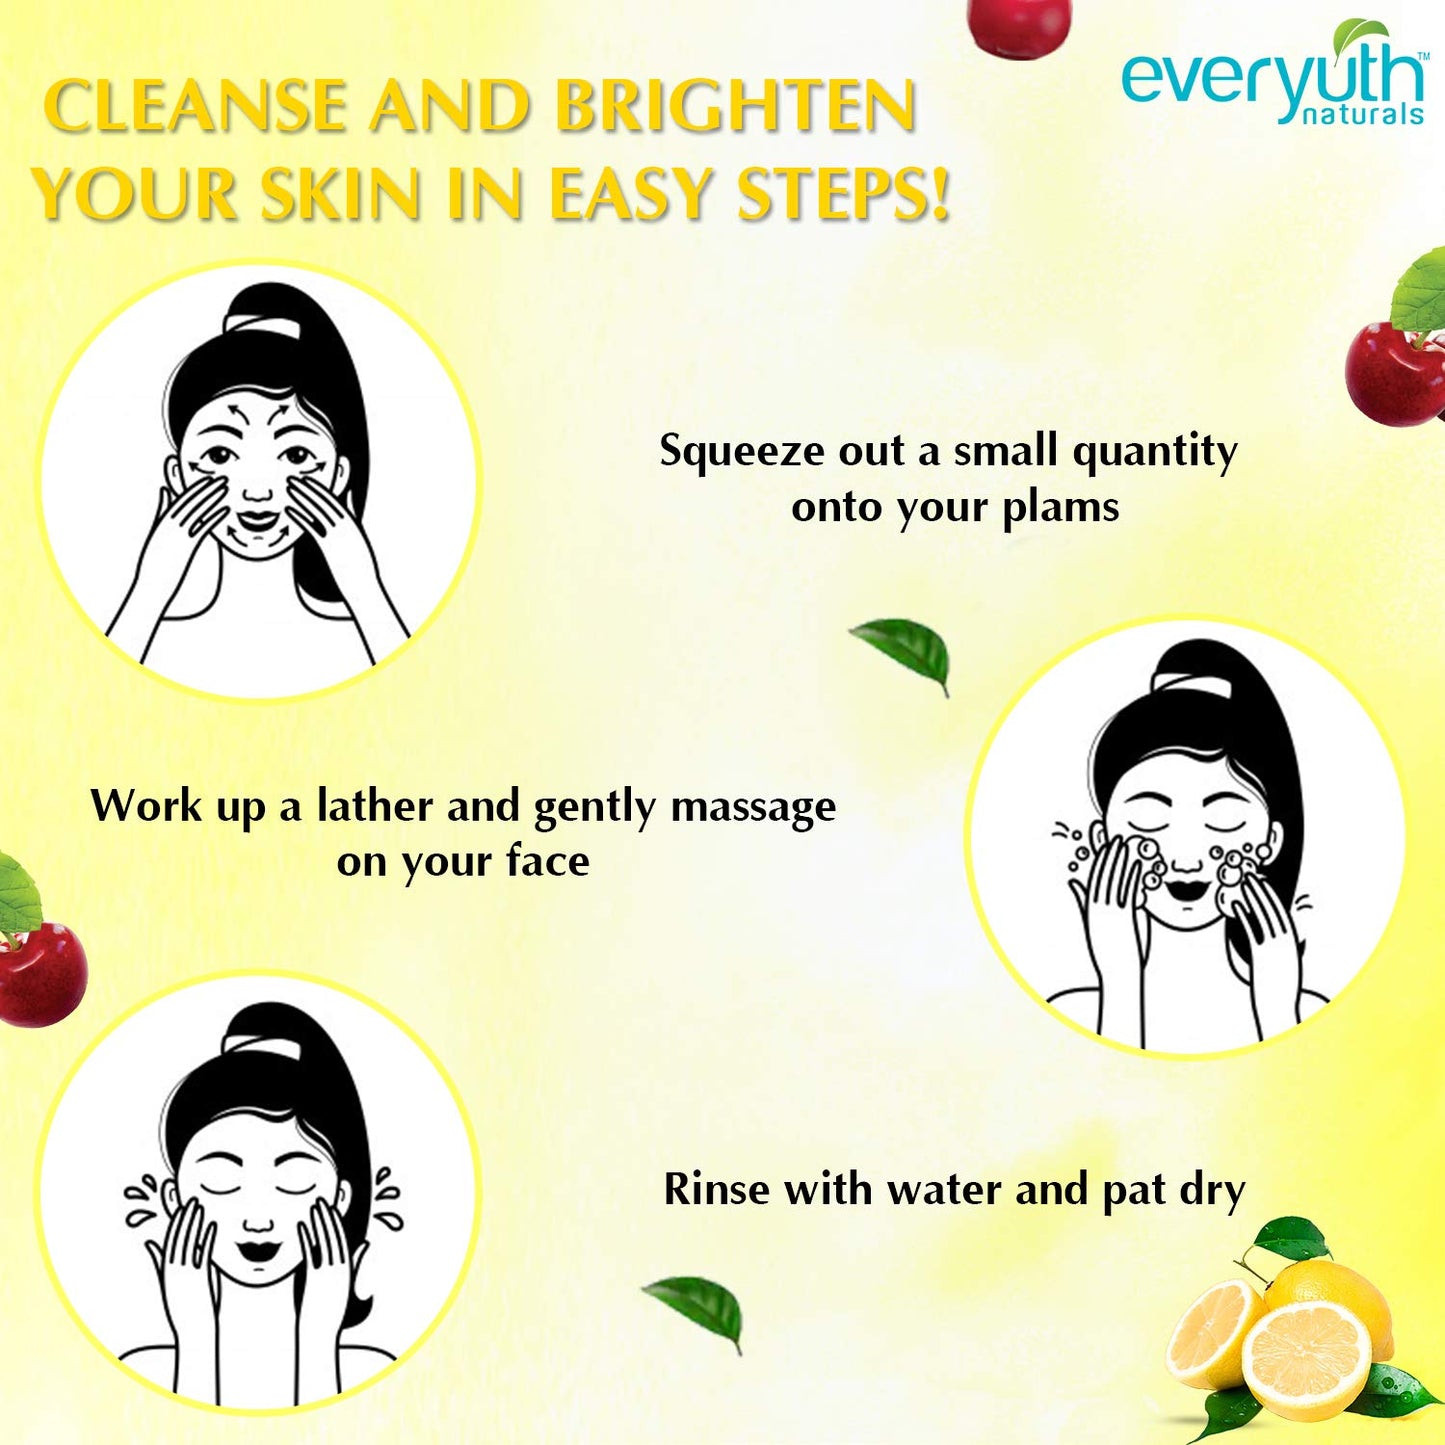 Everyuth Naturals Brightening Lemon And Cherry Face Wash 150gm